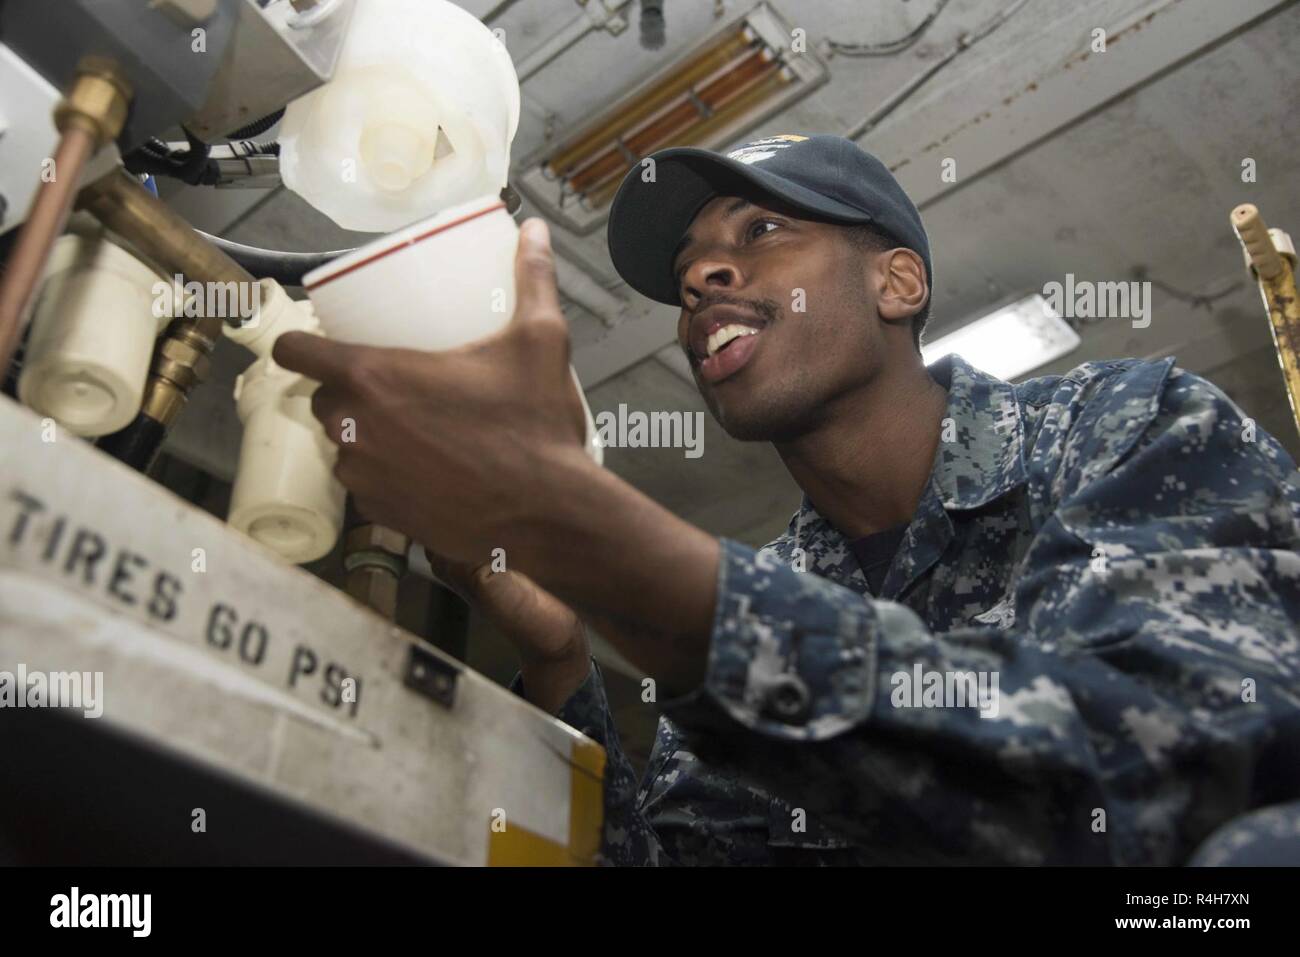 PORTSMOUTH, Va. (Oct. 3, 2018) Airman Christian Neal, from Washington, repairs a corrosion cart fuel filter in the hangar bay of the aircraft carrier USS Dwight D. Eisenhower (CVN 69). Ike is undergoing a Planned Incremental Availability (PIA) at Norfolk Naval Shipyard during the maintenance phase of the Optimized Fleet Response Plan (OFRP). Stock Photo